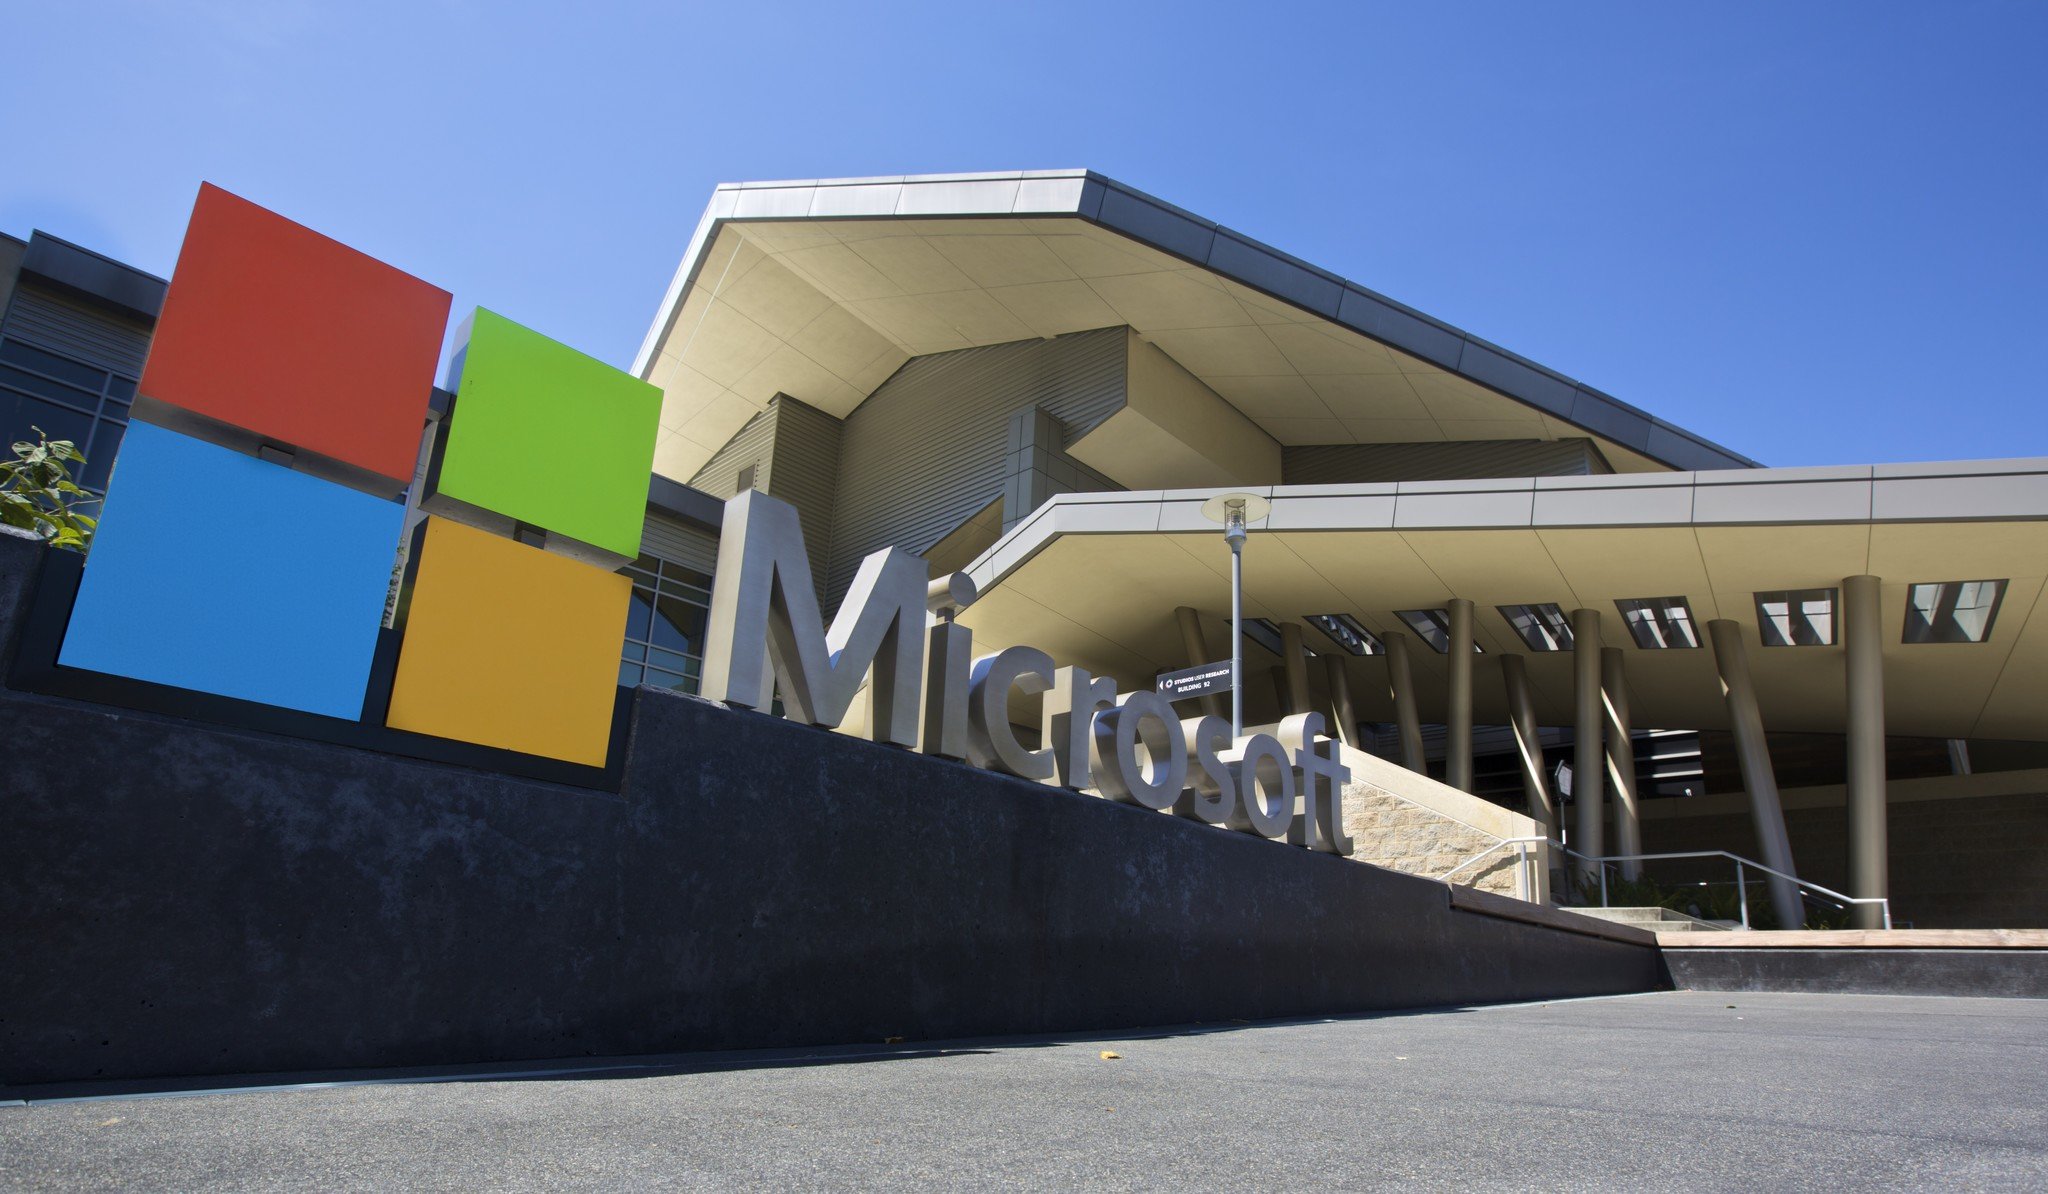 The Visitor's Center at Microsoft Headquarters campus is pictured July 17, 2014 in Redmond, Washington.